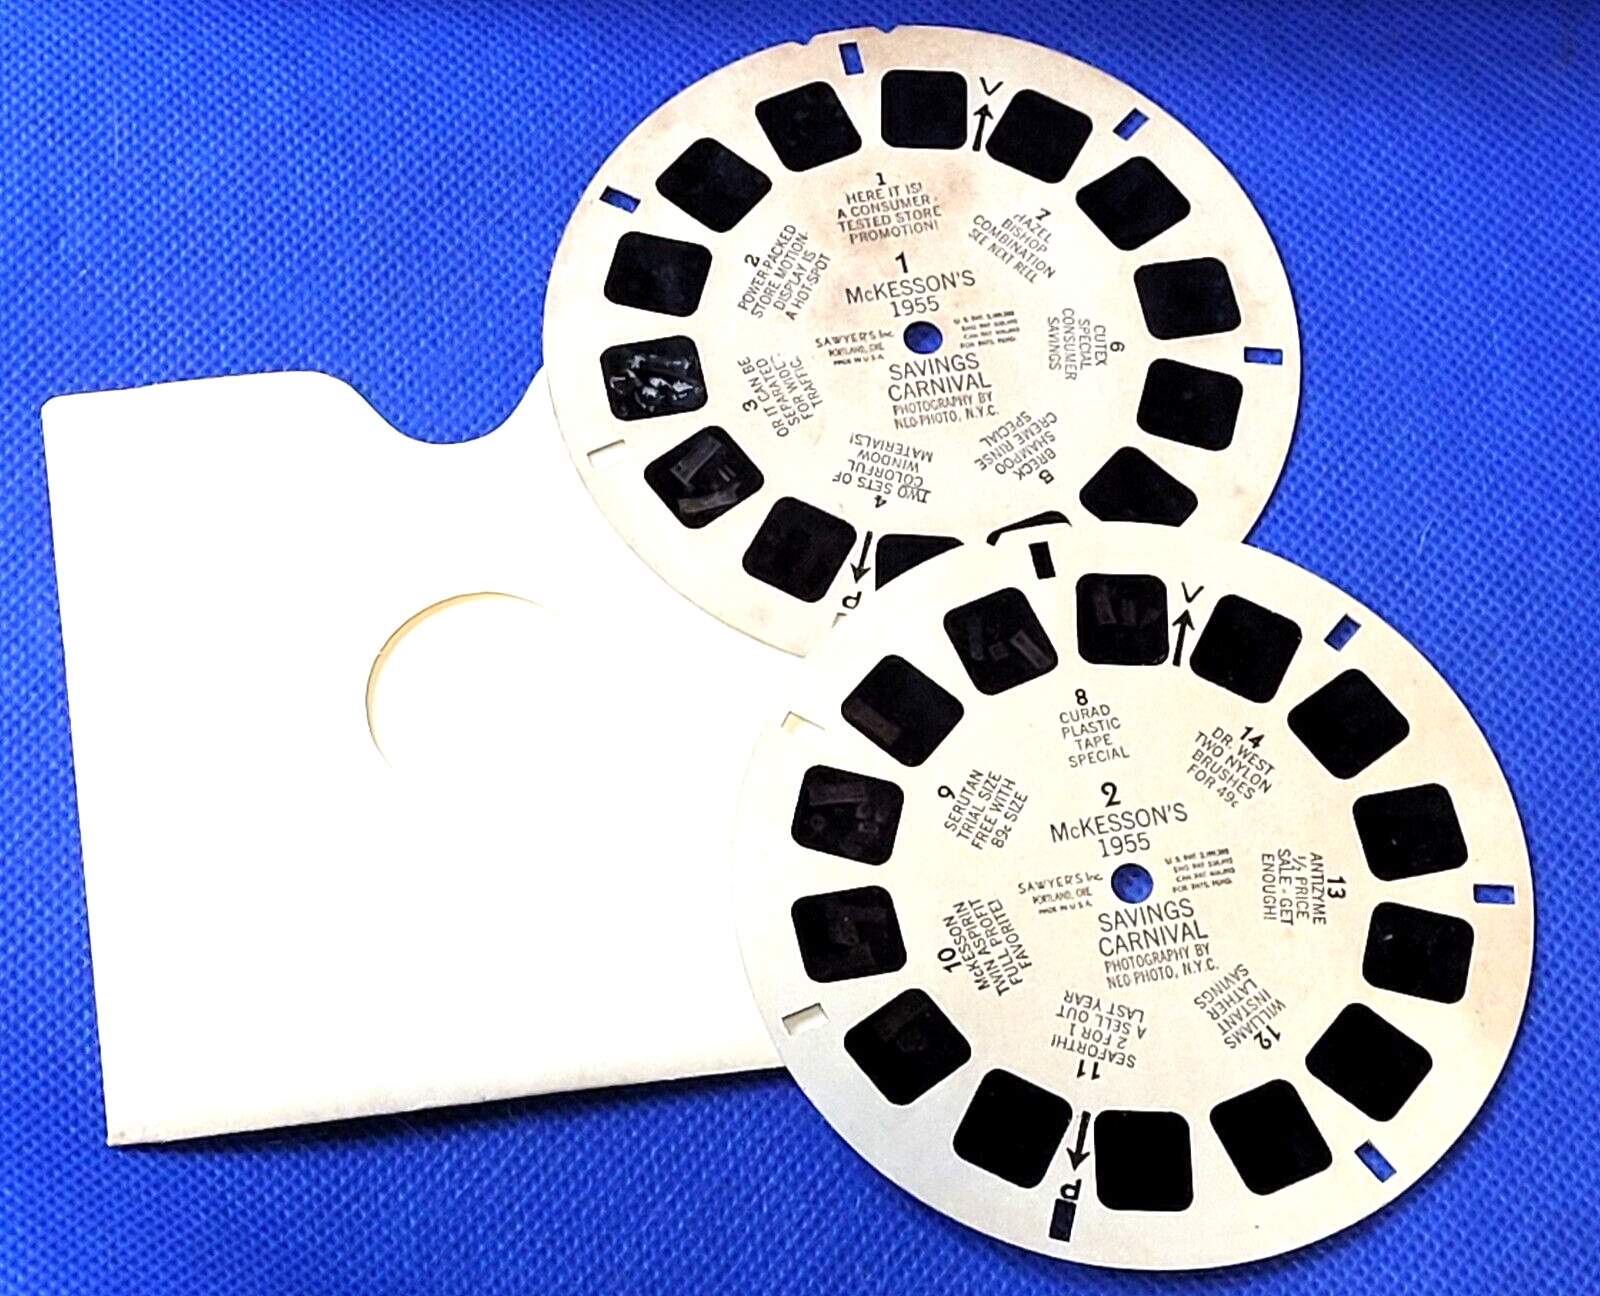 1 & 2 McKesson's 1955 Savings Carnival Promo Advert Commercial view-master reels